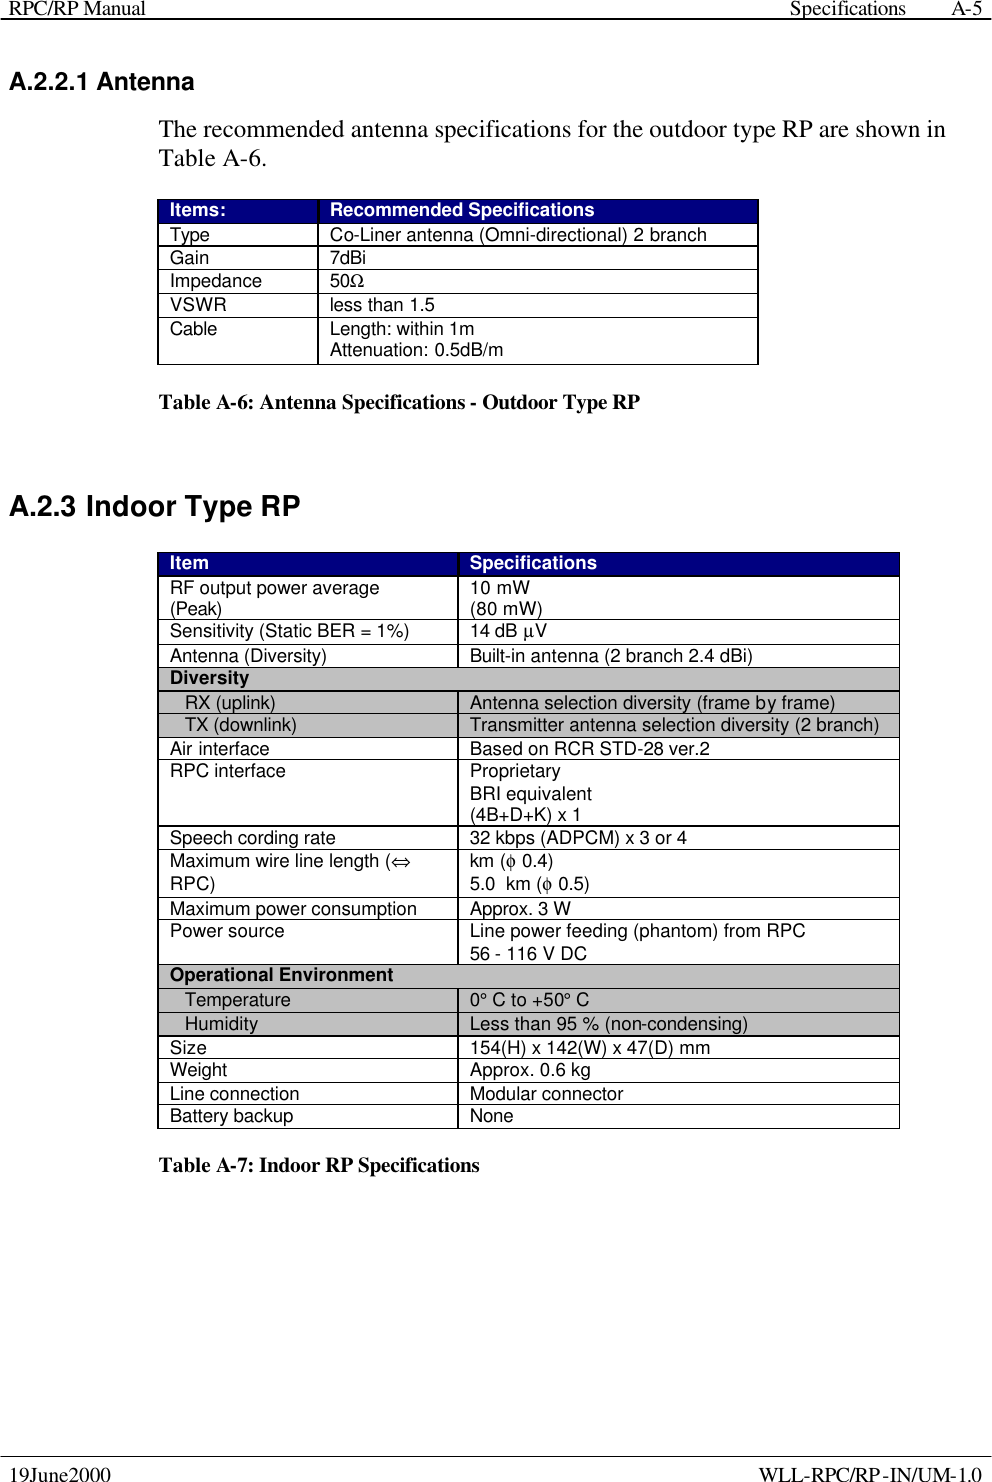 RPC/RP Manual    Specifications 19June2000    WLL-RPC/RP-IN/UM-1.0 A-5A.2.2.1 Antenna The recommended antenna specifications for the outdoor type RP are shown in Table A-6. Items: Recommended Specifications Type Co-Liner antenna (Omni-directional) 2 branch Gain 7dBi Impedance 50Ω VSWR less than 1.5 Cable Length: within 1m Attenuation: 0.5dB/m Table A-6: Antenna Specifications - Outdoor Type RP A.2.3 Indoor Type RP Item Specifications RF output power average (Peak) 10 mW  (80 mW) Sensitivity (Static BER = 1%) 14 dB µV Antenna (Diversity) Built-in antenna (2 branch 2.4 dBi) Diversity    RX (uplink) Antenna selection diversity (frame by frame)    TX (downlink) Transmitter antenna selection diversity (2 branch) Air interface Based on RCR STD-28 ver.2 RPC interface Proprietary BRI equivalent (4B+D+K) x 1 Speech cording rate 32 kbps (ADPCM) x 3 or 4 Maximum wire line length (⇔ RPC) km (φ 0.4) 5.0  km (φ 0.5) Maximum power consumption Approx. 3 W Power source Line power feeding (phantom) from RPC 56 - 116 V DC Operational Environment    Temperature 0° C to +50° C    Humidity Less than 95 % (non-condensing) Size 154(H) x 142(W) x 47(D) mm Weight Approx. 0.6 kg Line connection Modular connector Battery backup None Table A-7: Indoor RP Specifications    